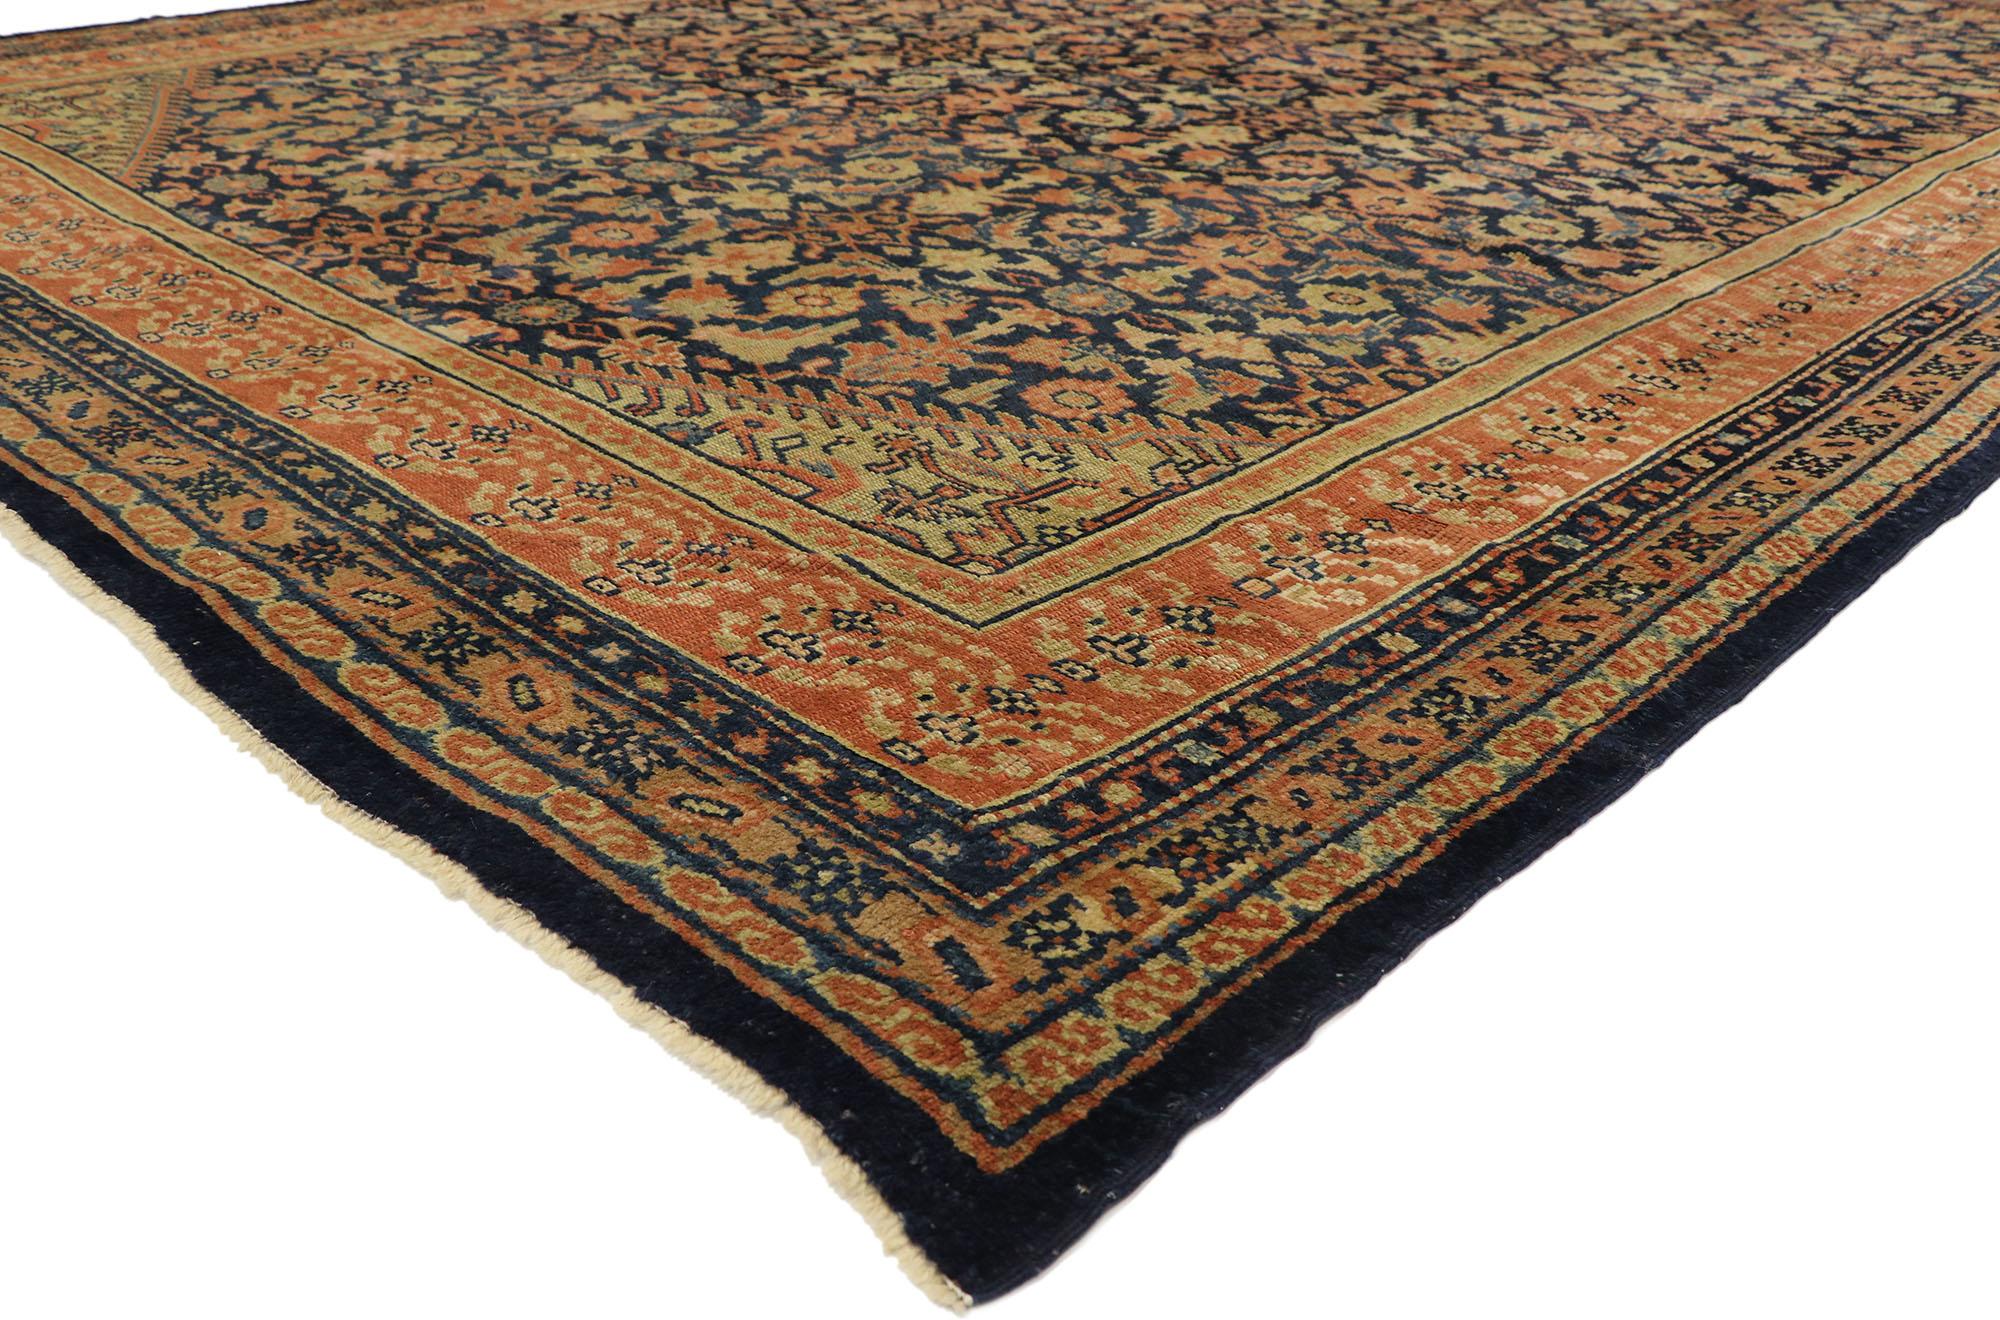 51634, late 19th century antique Persian Kurdish rug with Traditional English style. With timeless elegance and nostalgic charm, this hand knotted wool antique Persian Kurdish rug can beautifully blend modern, contemporary and traditional interiors.